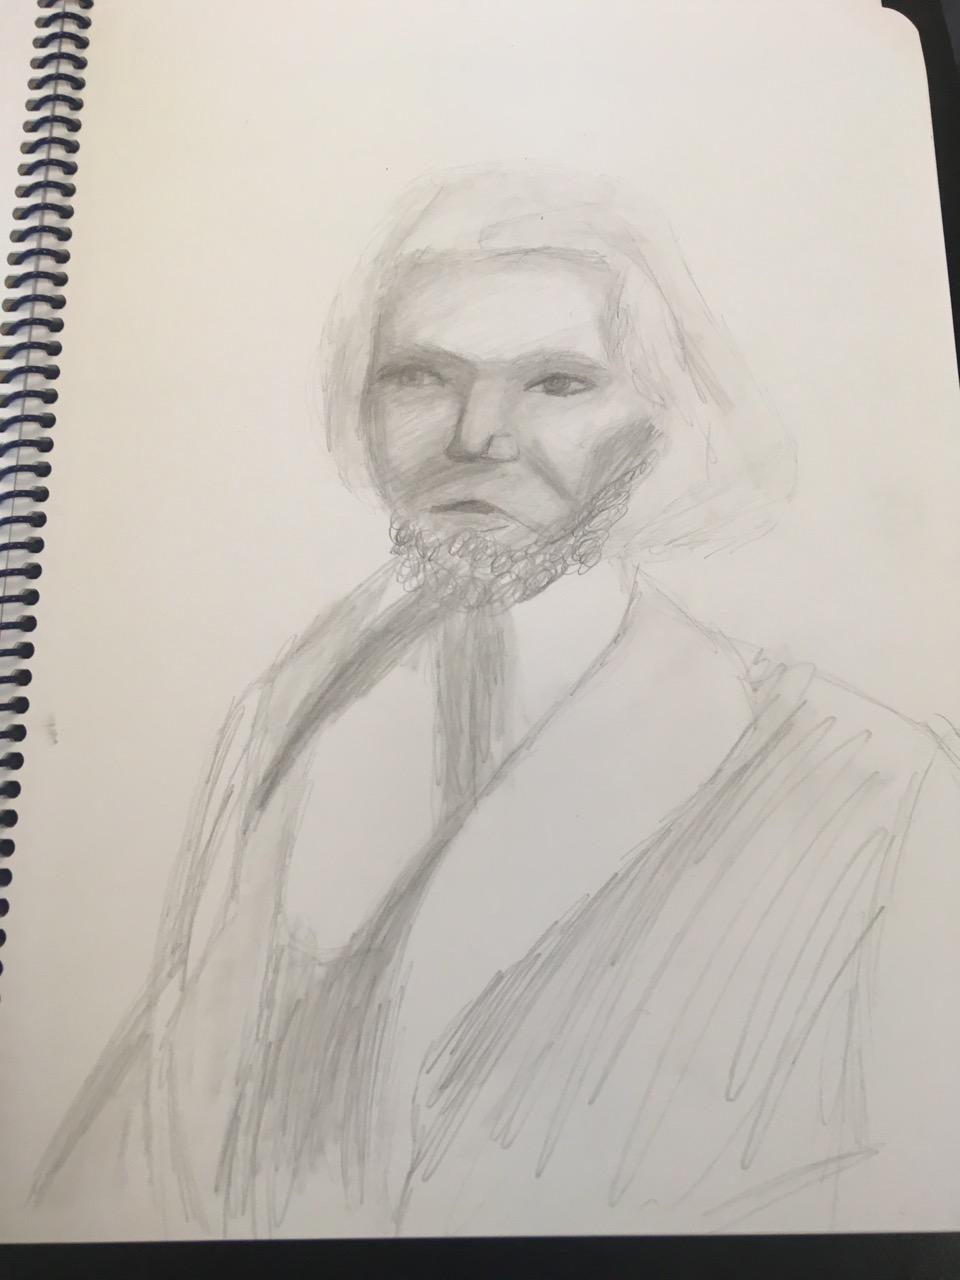 Student artwork of abolitionist, orator, and writer Frederick Douglass.